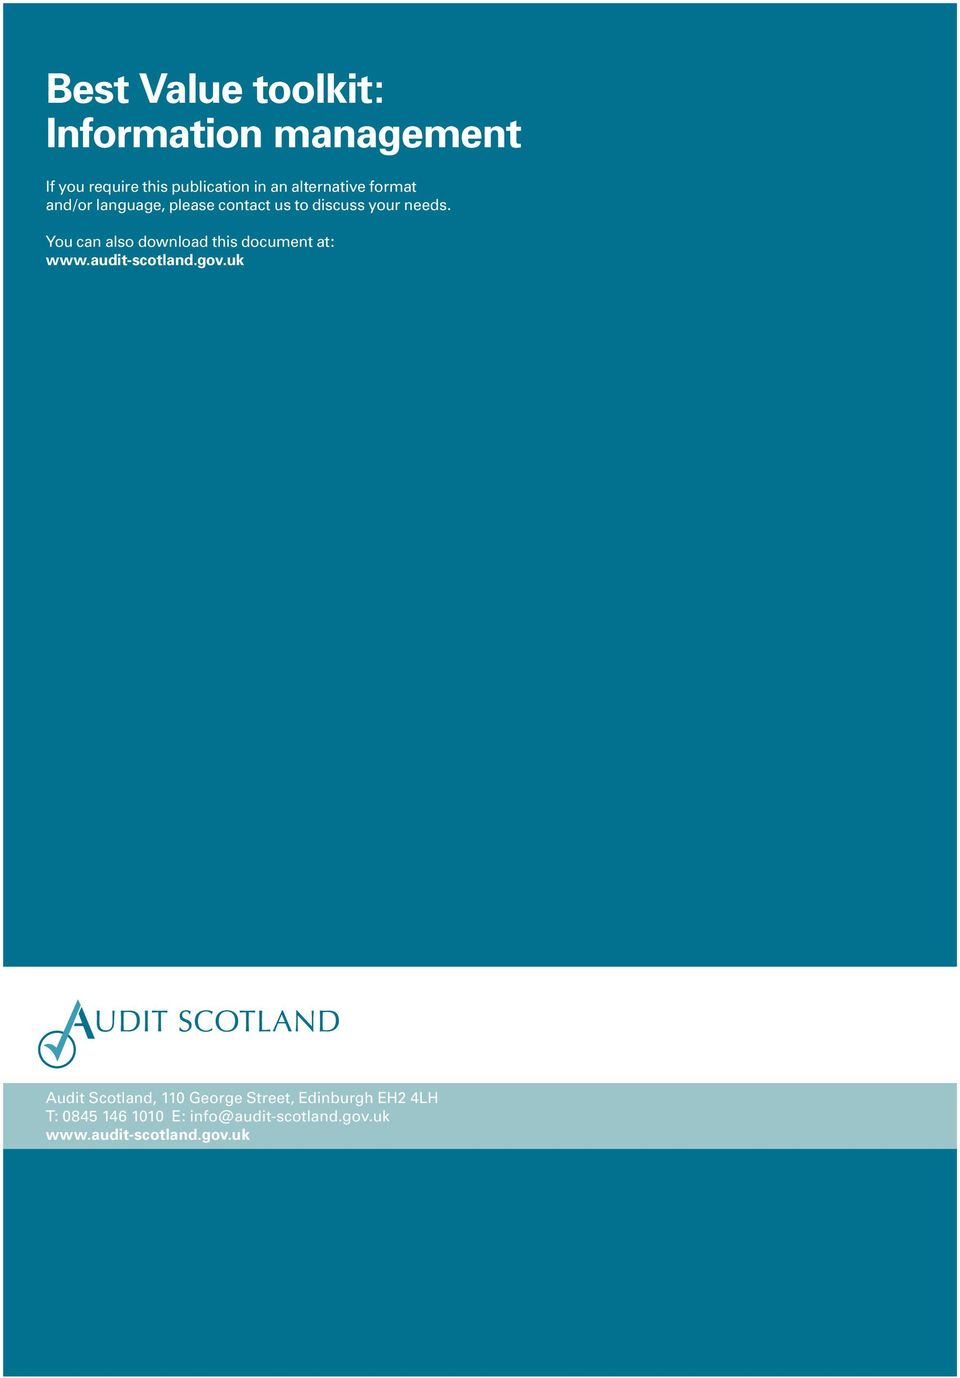 You can also download this document at: www.audit-scotland.gov.